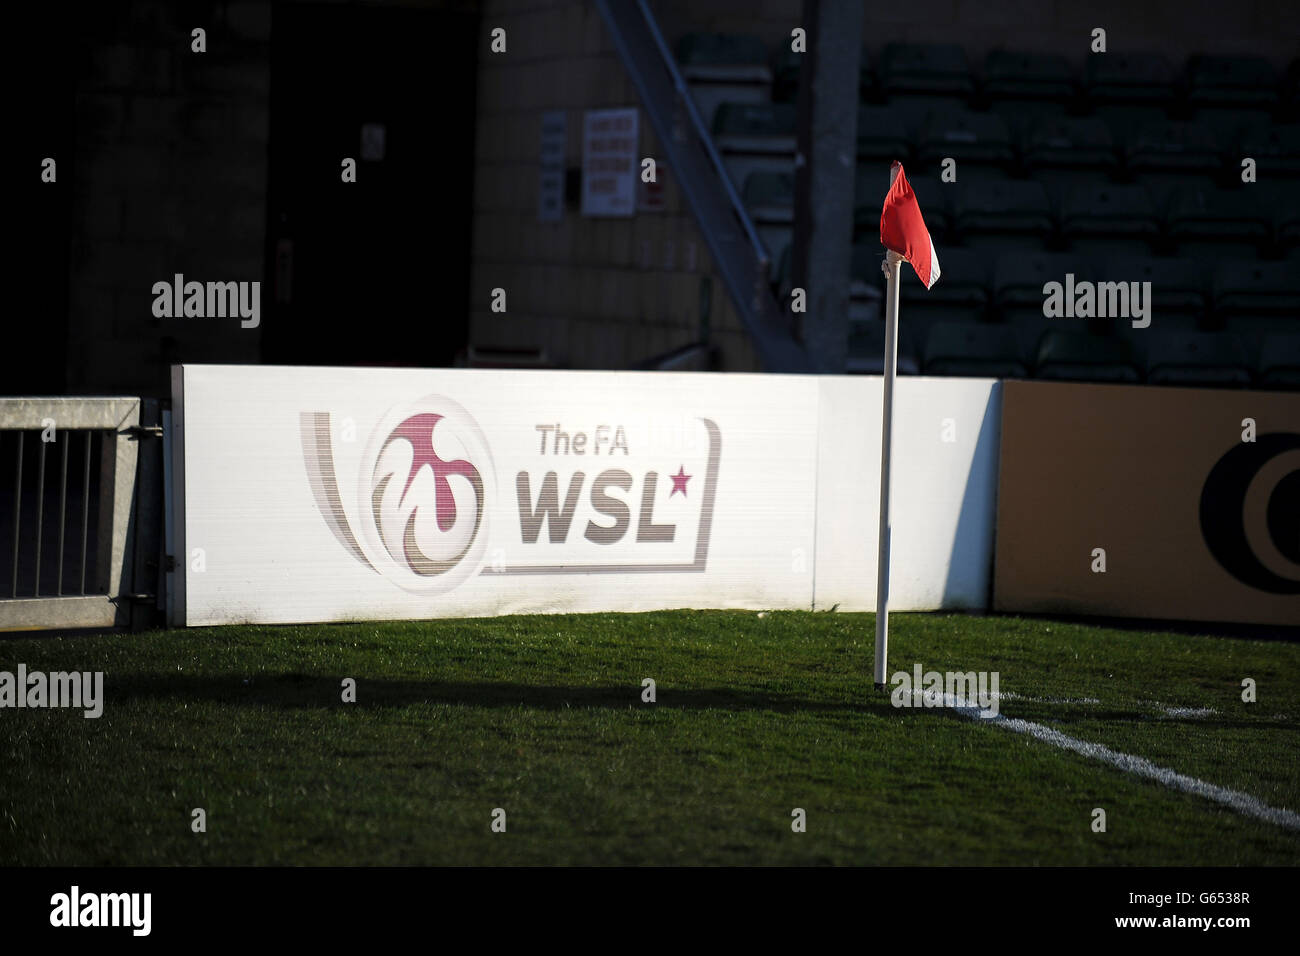 Soccer - FA Women's Super League - Lincoln City Ladies v Arsenal Ladies - Sincil Bank. Detail of a corner flag and board reading The FA WSA. Stock Photo